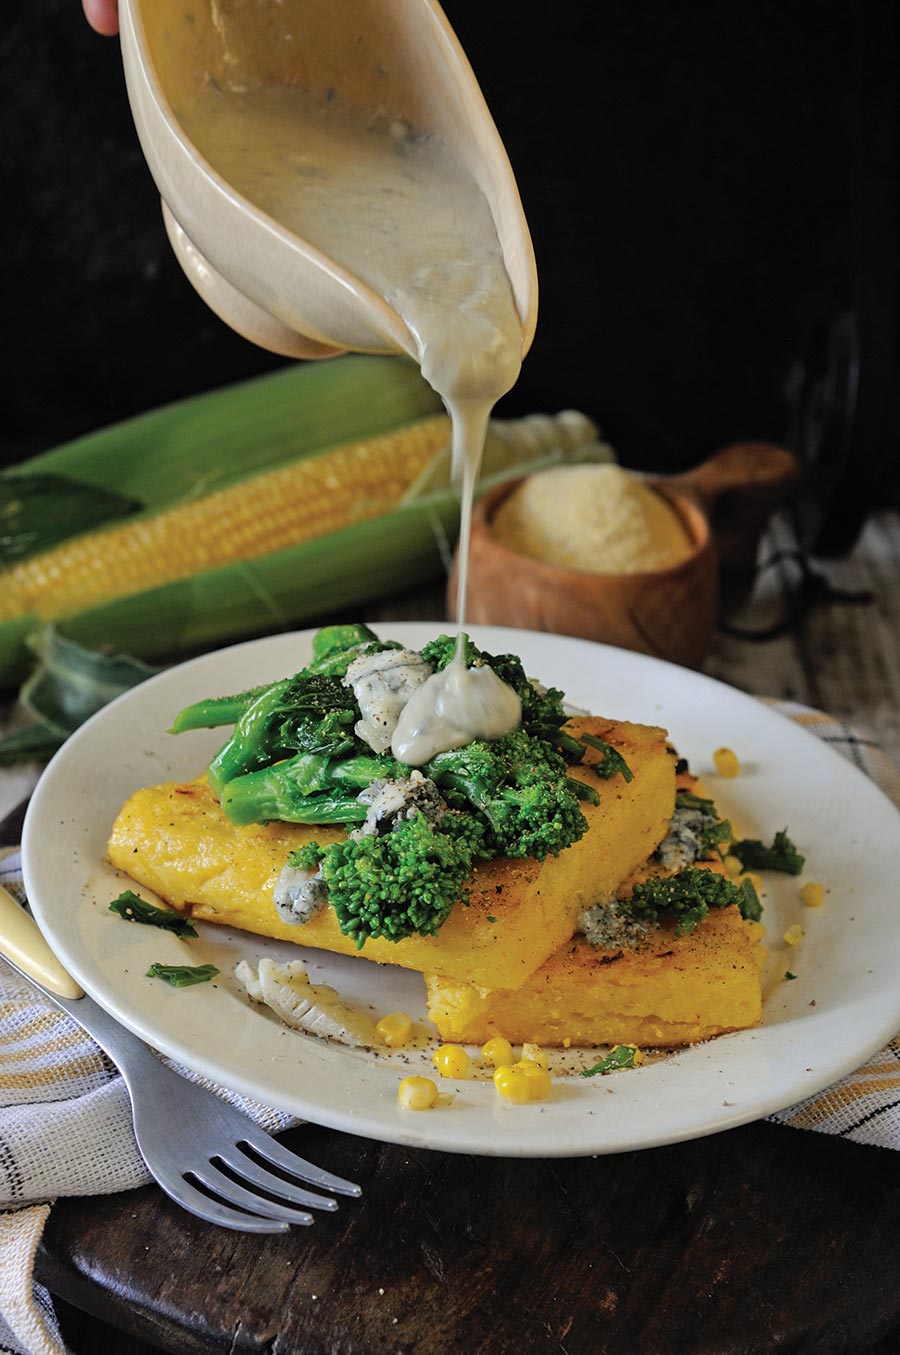 Grilled polenta with cime di rapa and gorgonzola sauce